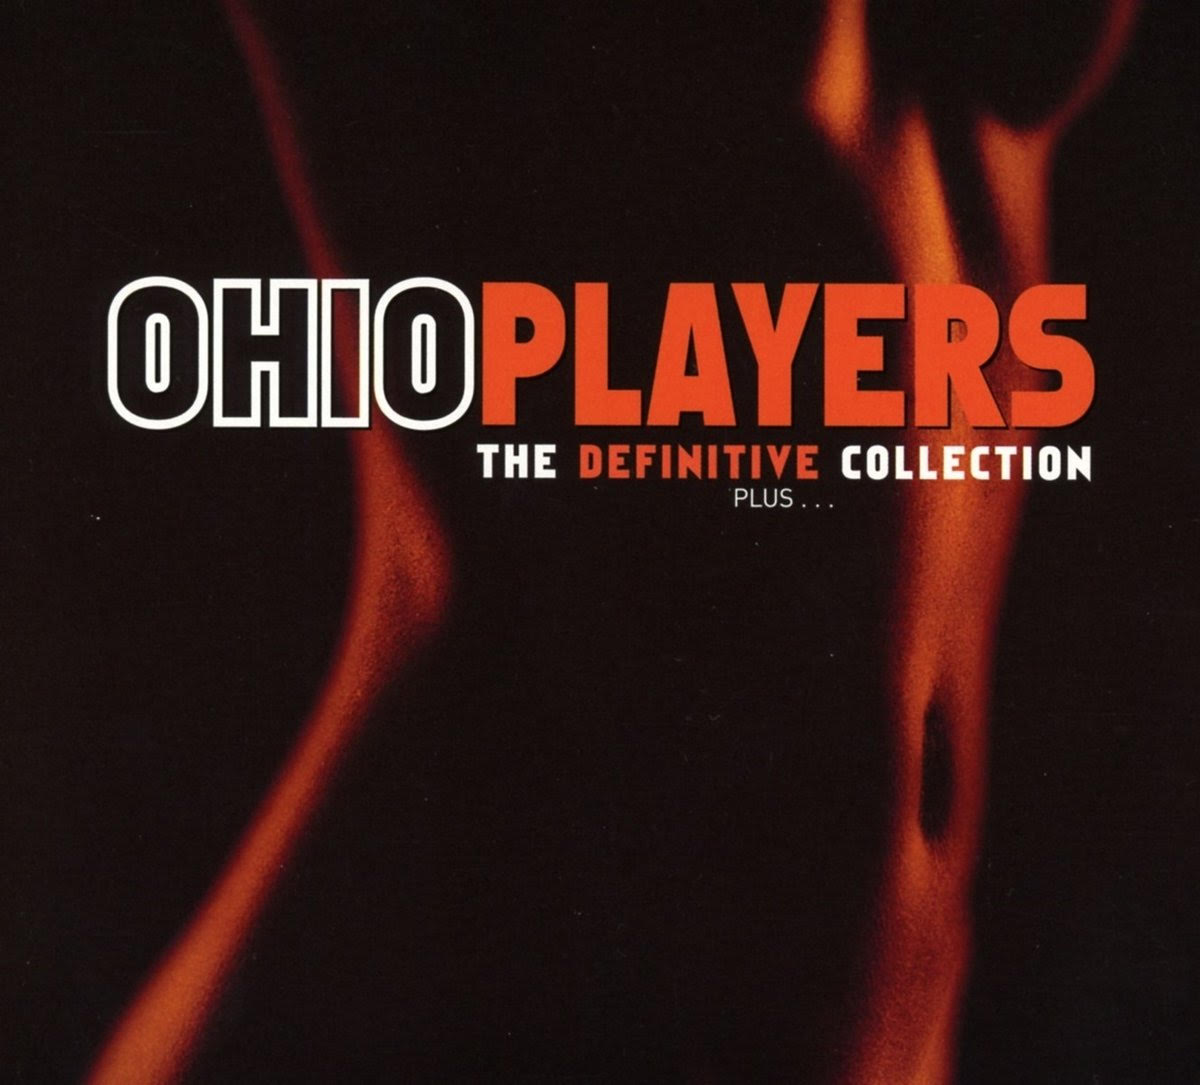 Ohio Players - The Definitive Collection Plus... (3 CD Box Set - Imported)